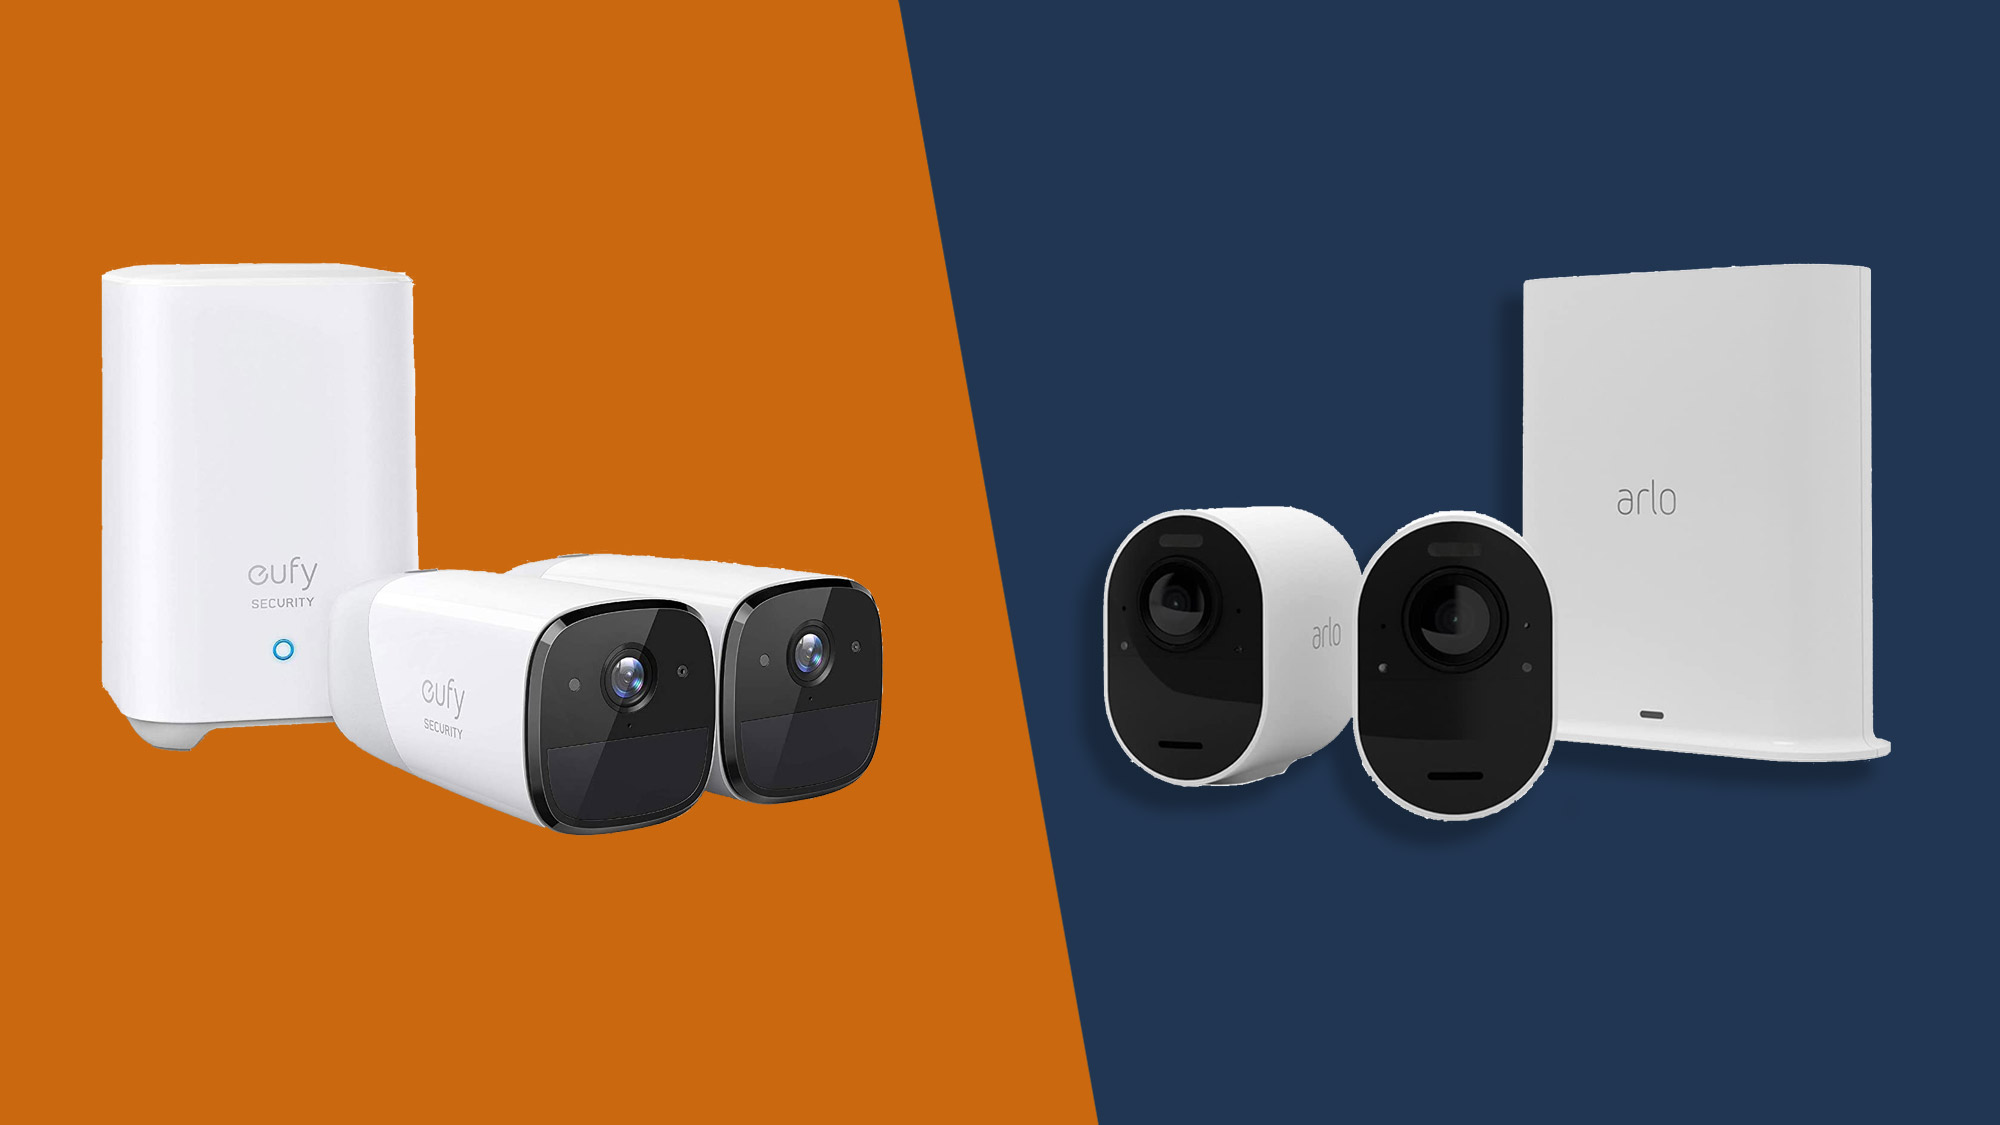 Eufy vs Arlo: which home security camera system is best for you? | TechRadar